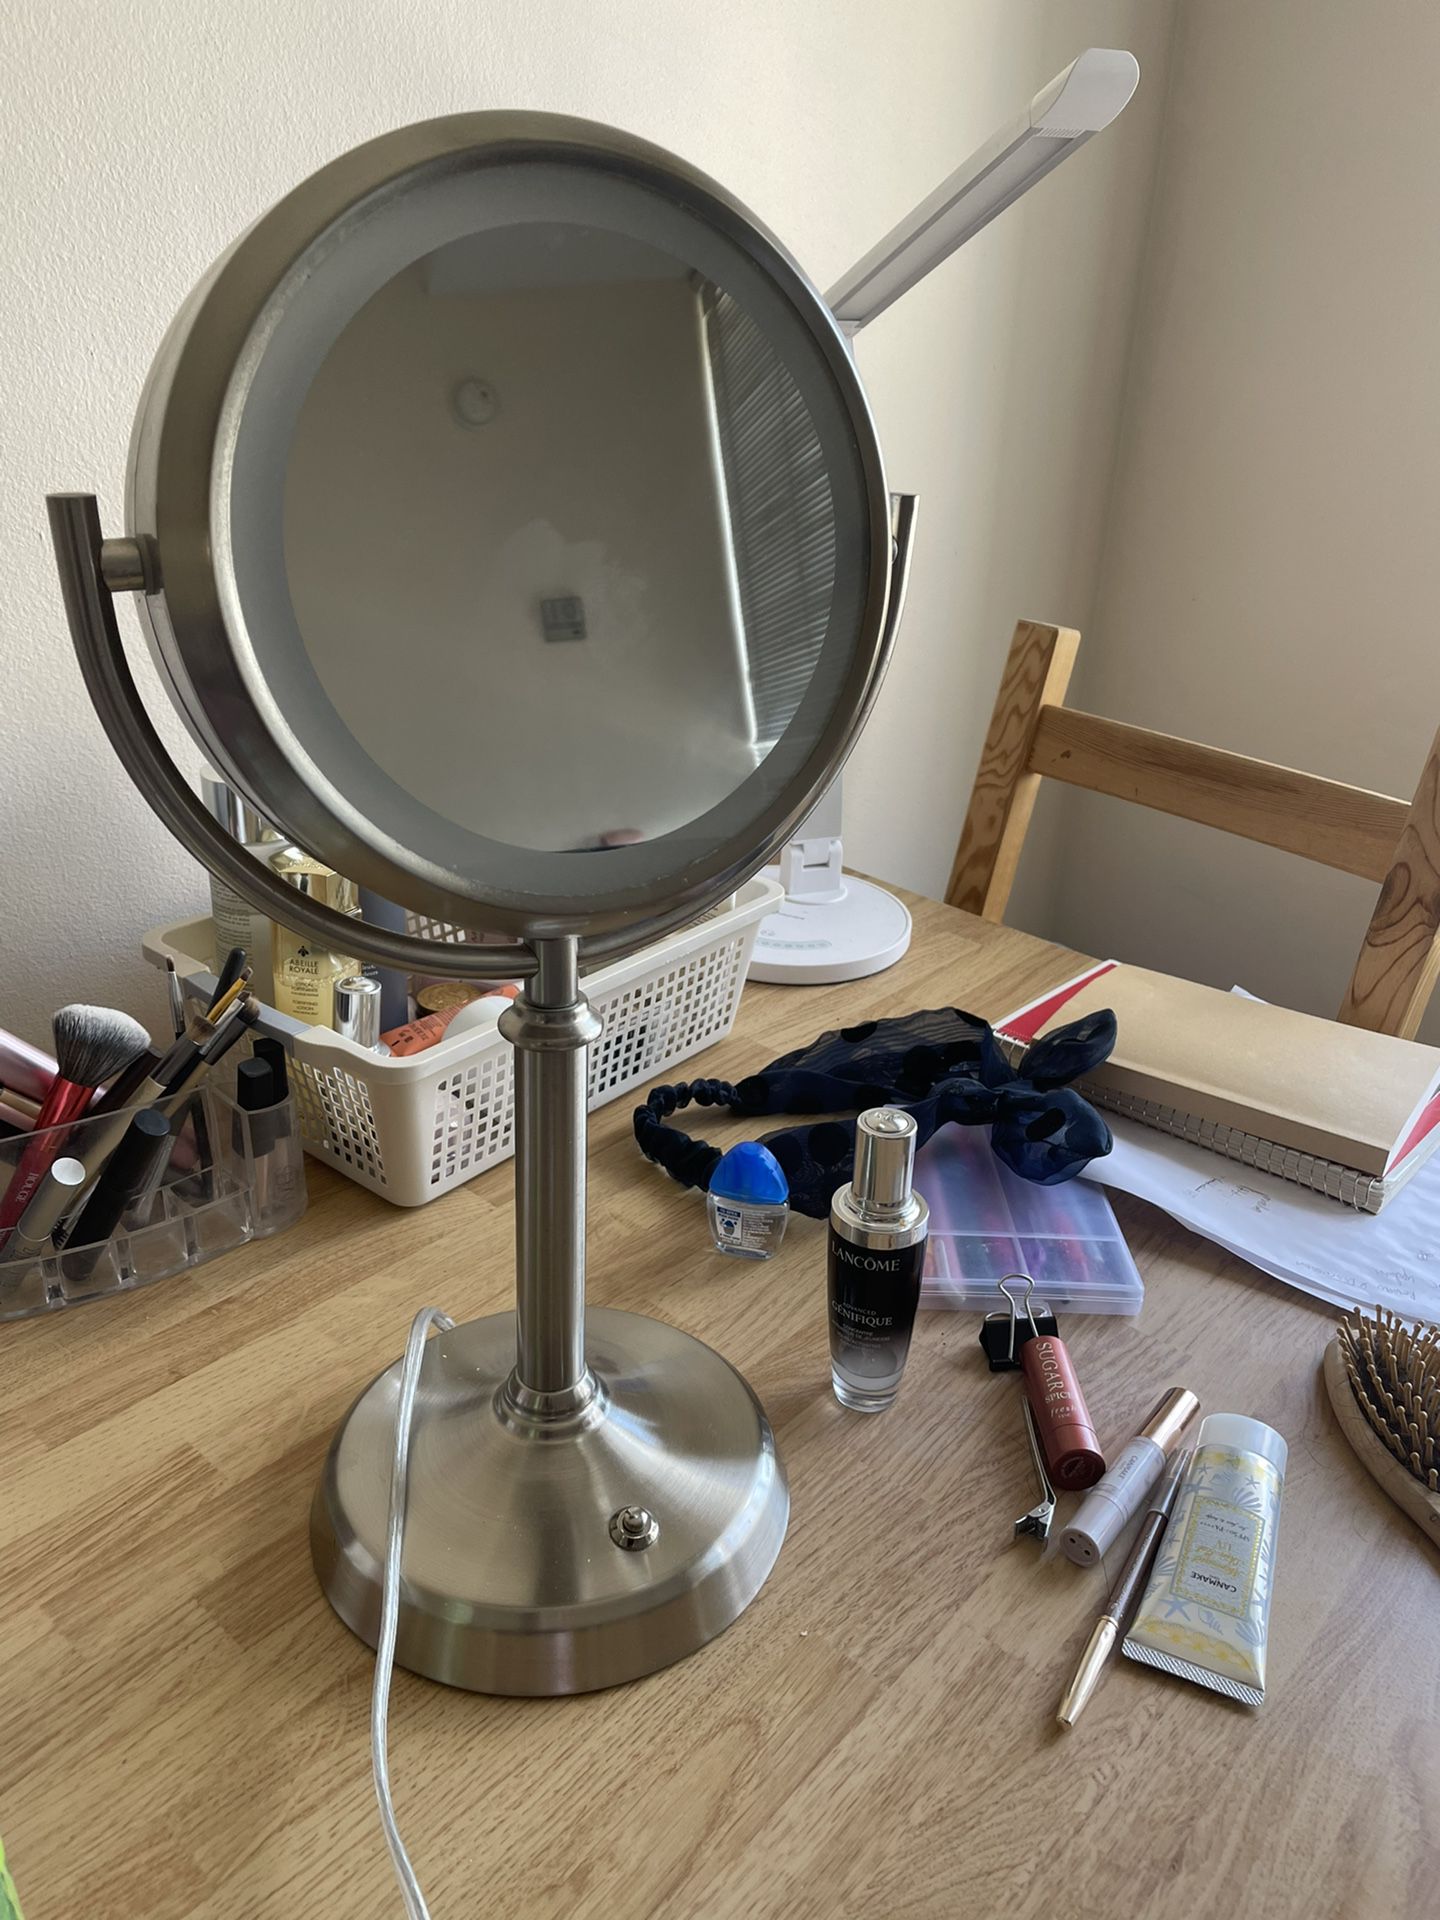 Professional 8.5” Lighted Makeup Mirror